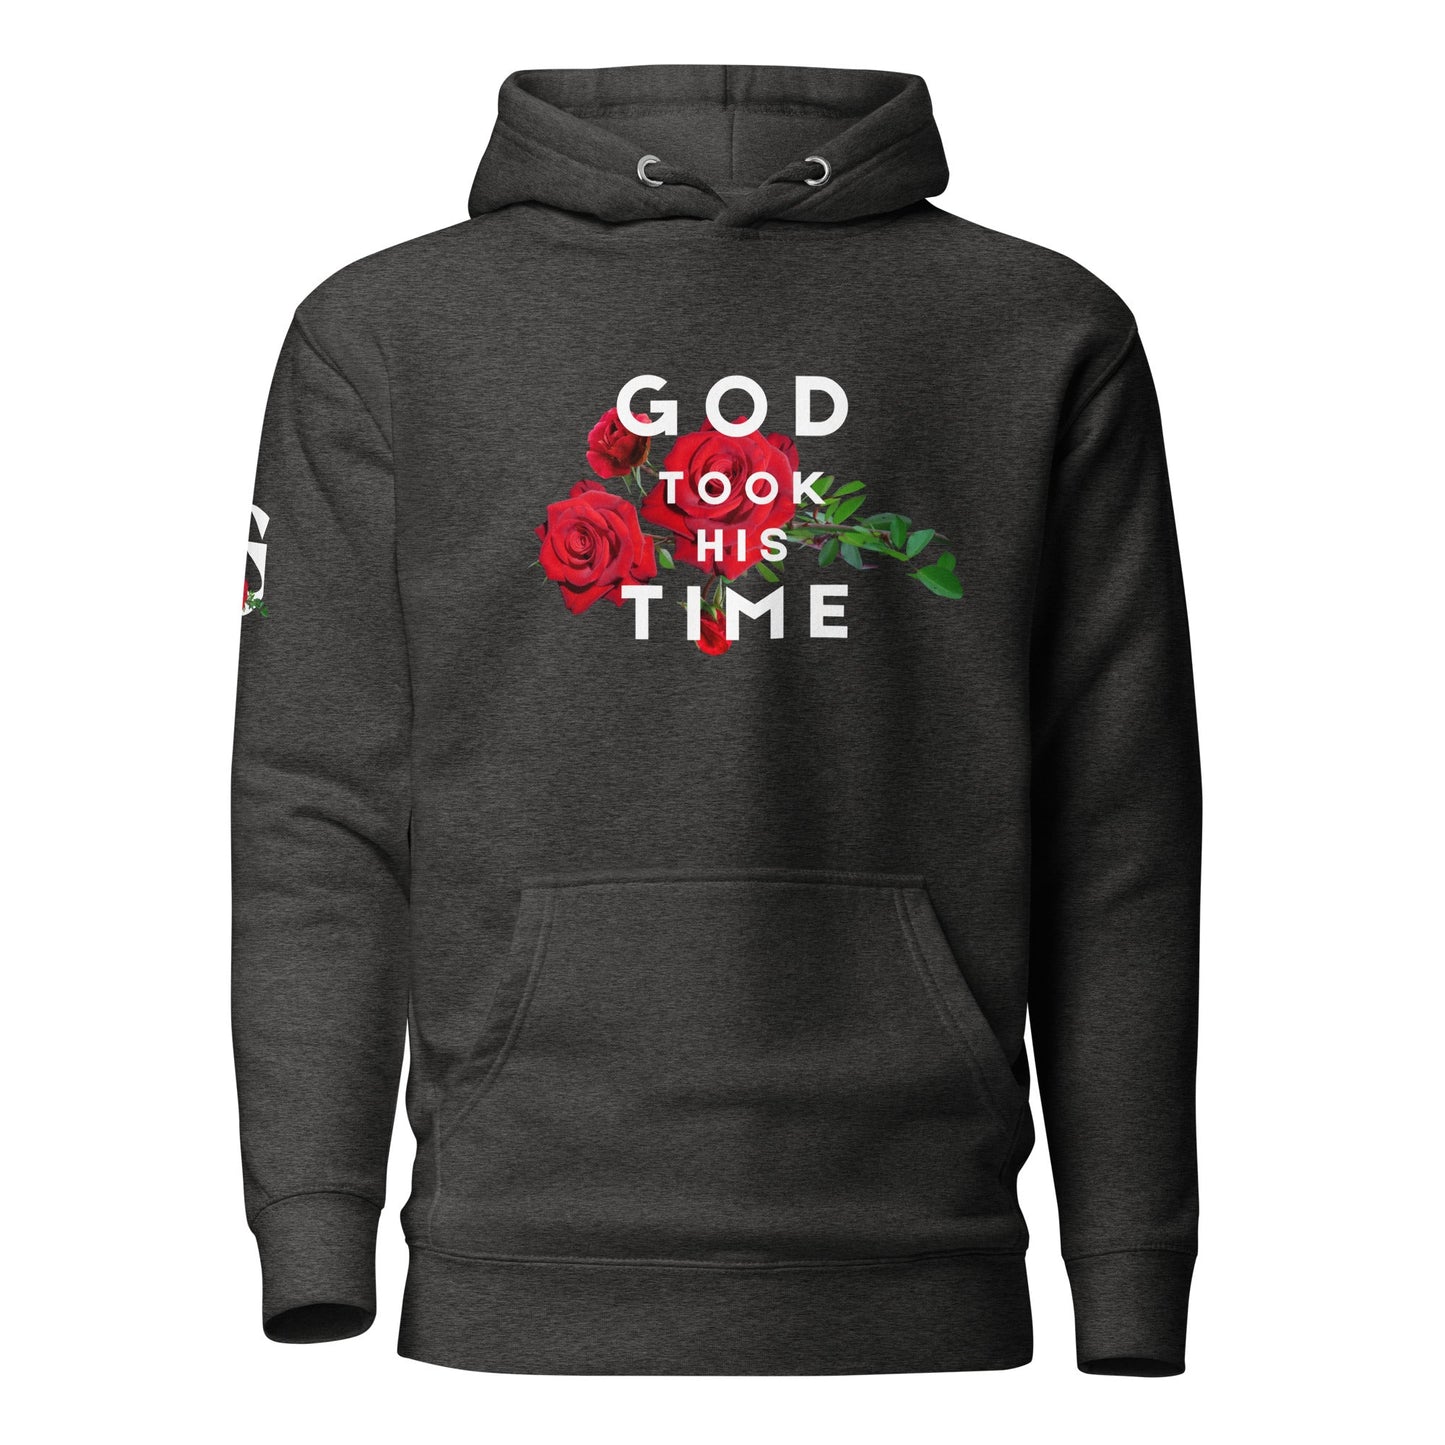 God took his time Unisex Hoodie - Catch This Tea Shirts